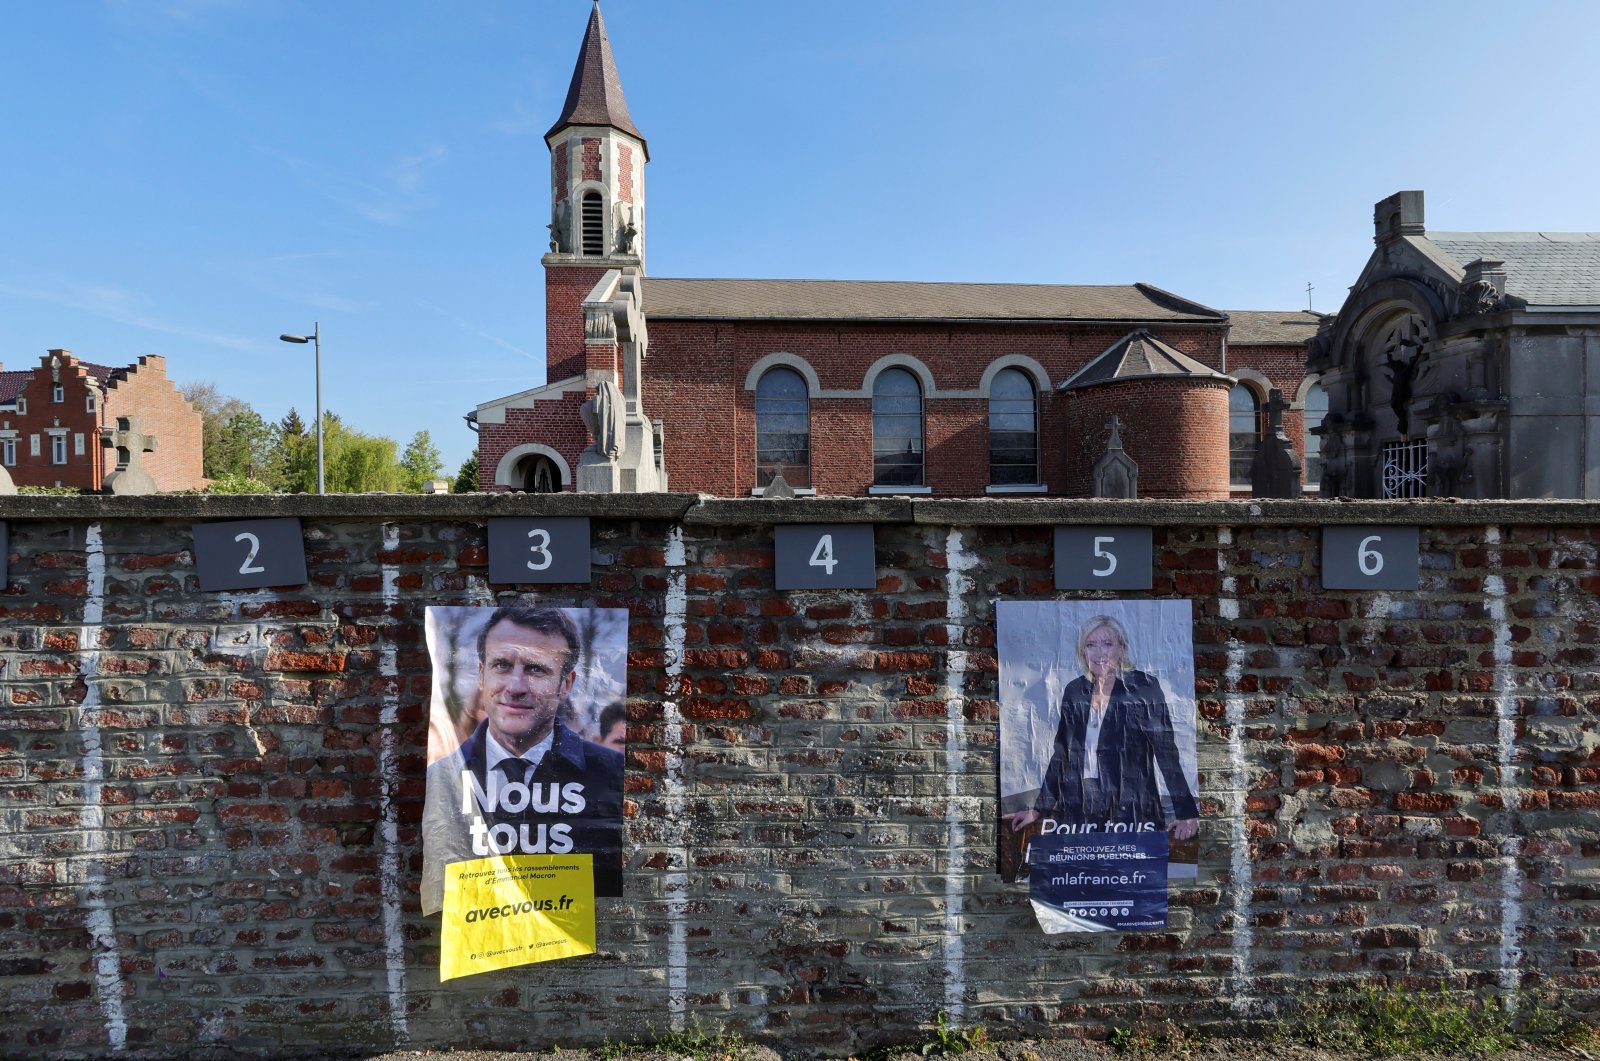 Official campaign posters of French presidential election candidates Marine le Pen, leader of French far-right National Rally (Rassemblement National) party, and French President Emmanuel Macron, candidate for his re-election, displayed on a cemetery wall in Aubencheul-au-Bac, France, April 16, 2022. (REUTERS)